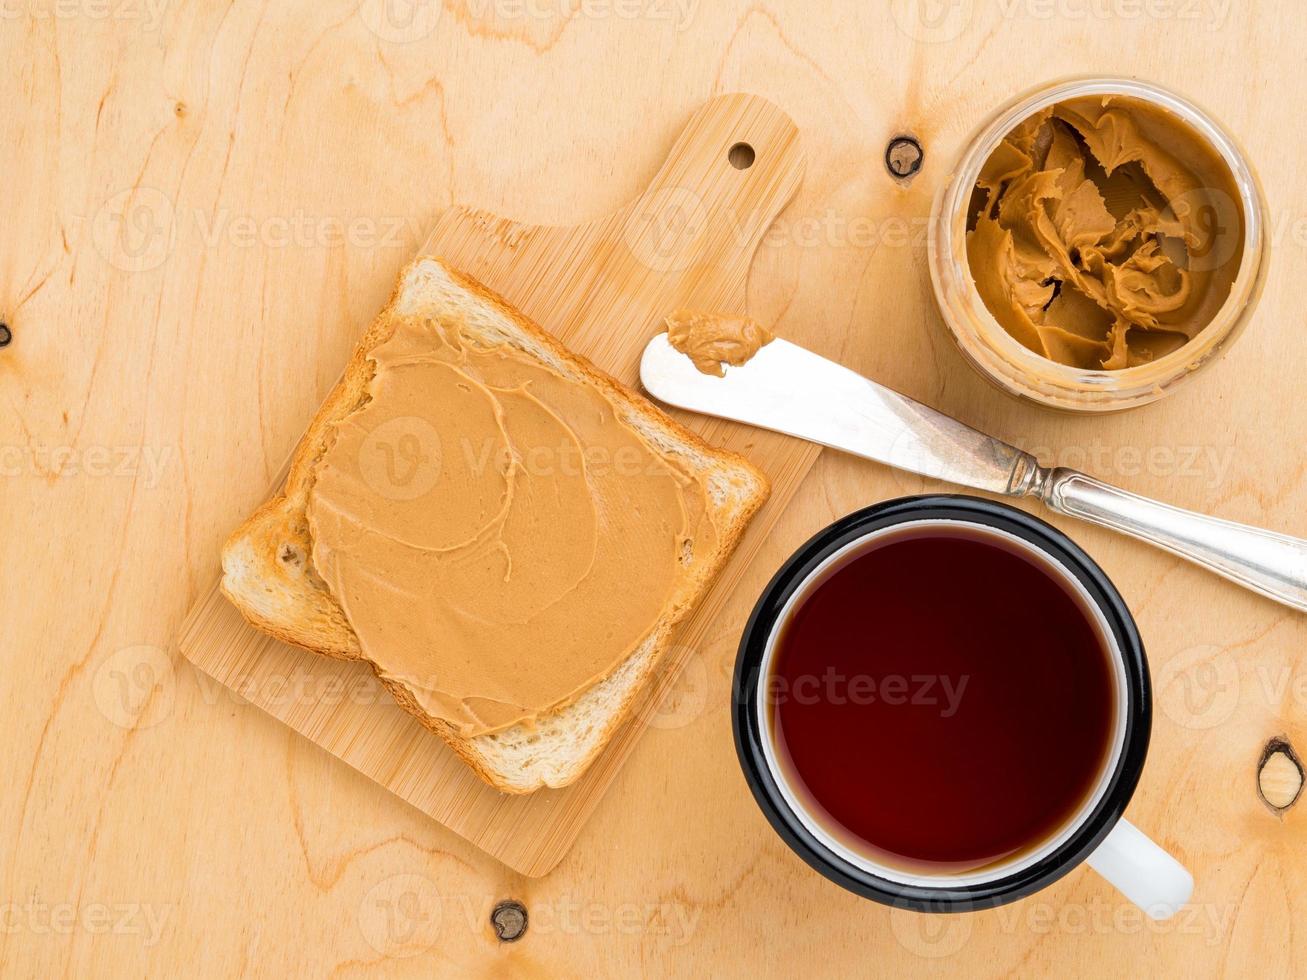 toast with peanut butter, knife for spreading on a sandwich, a mug of tea on a beige wood background photo